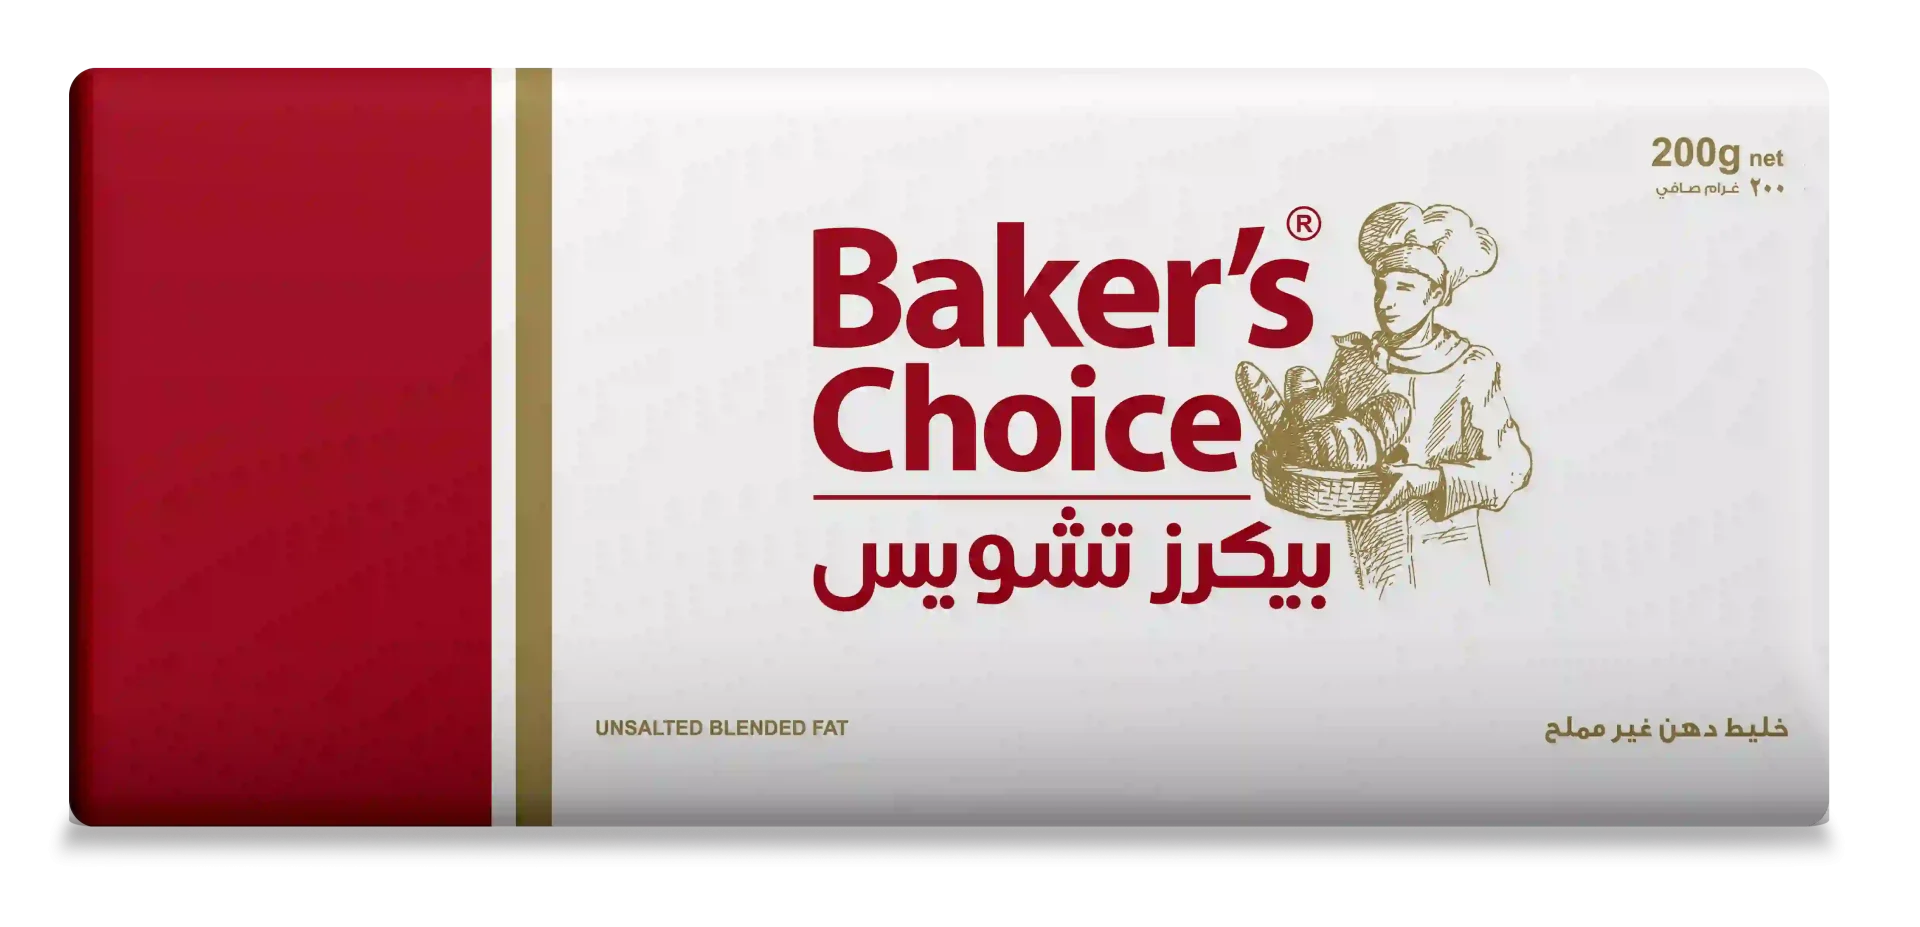 Baker's Choice Unsalted Blended Fat